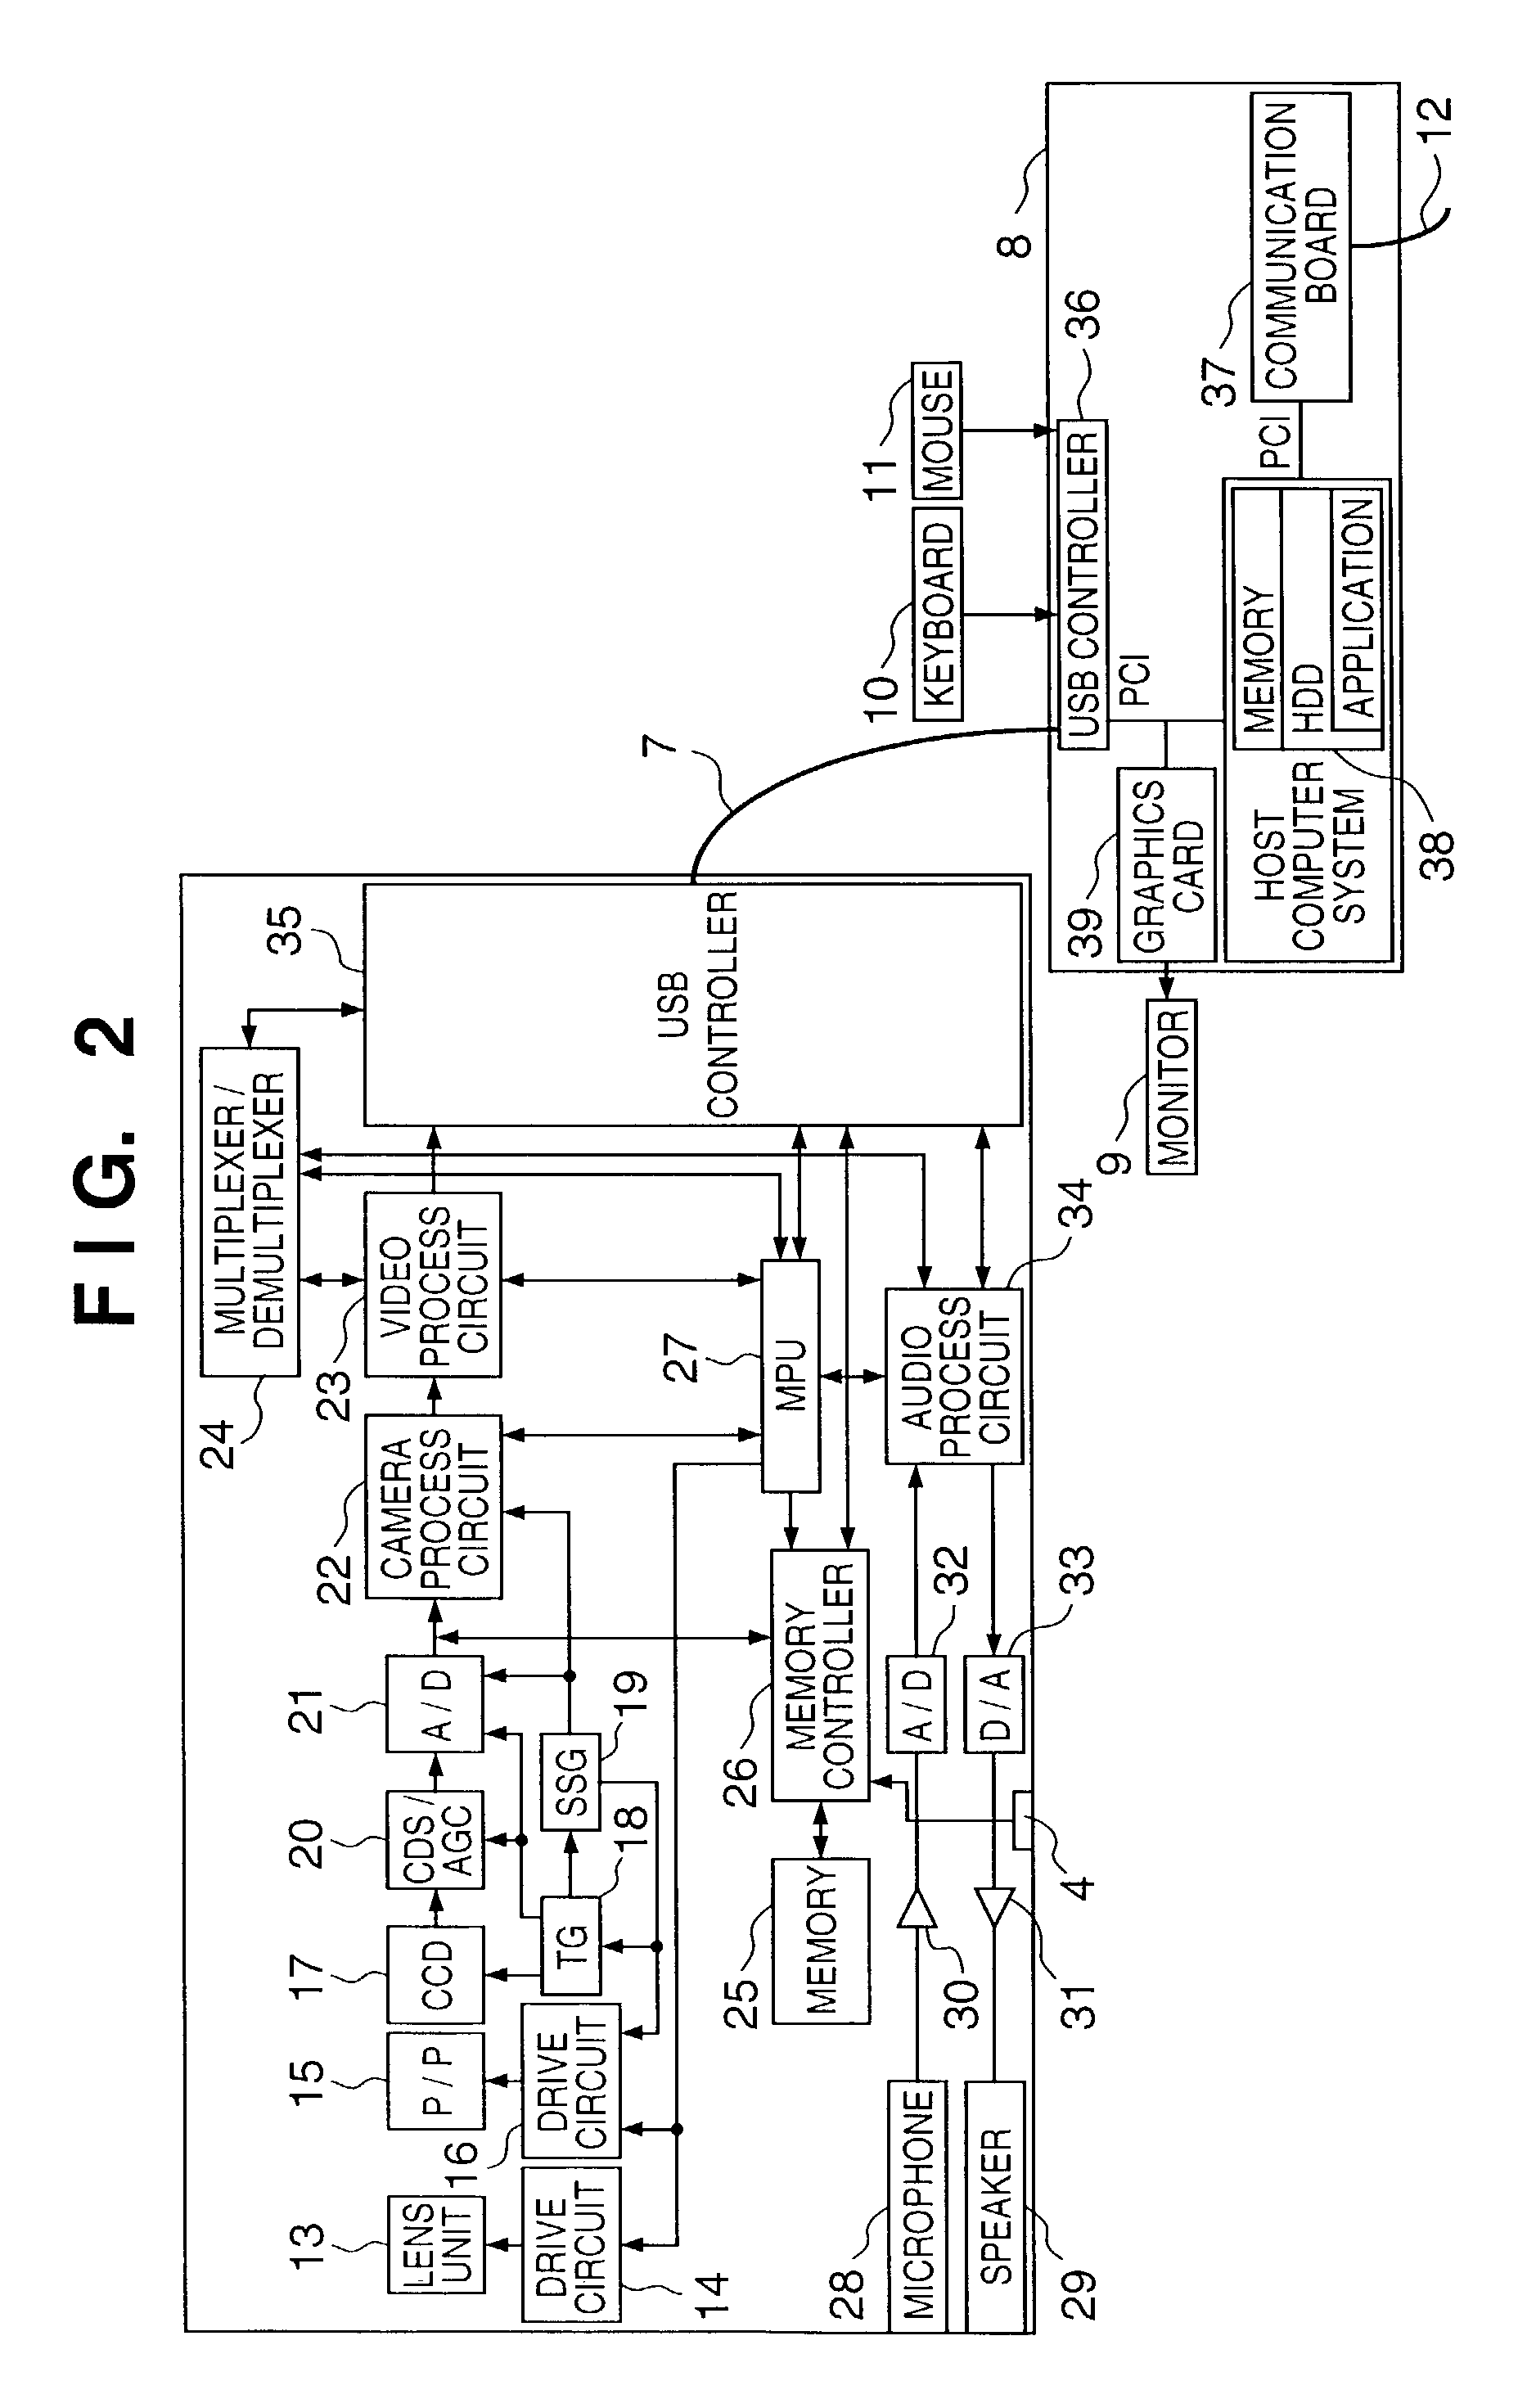 Image sensing apparatus and method having high and low resolution transfer modes